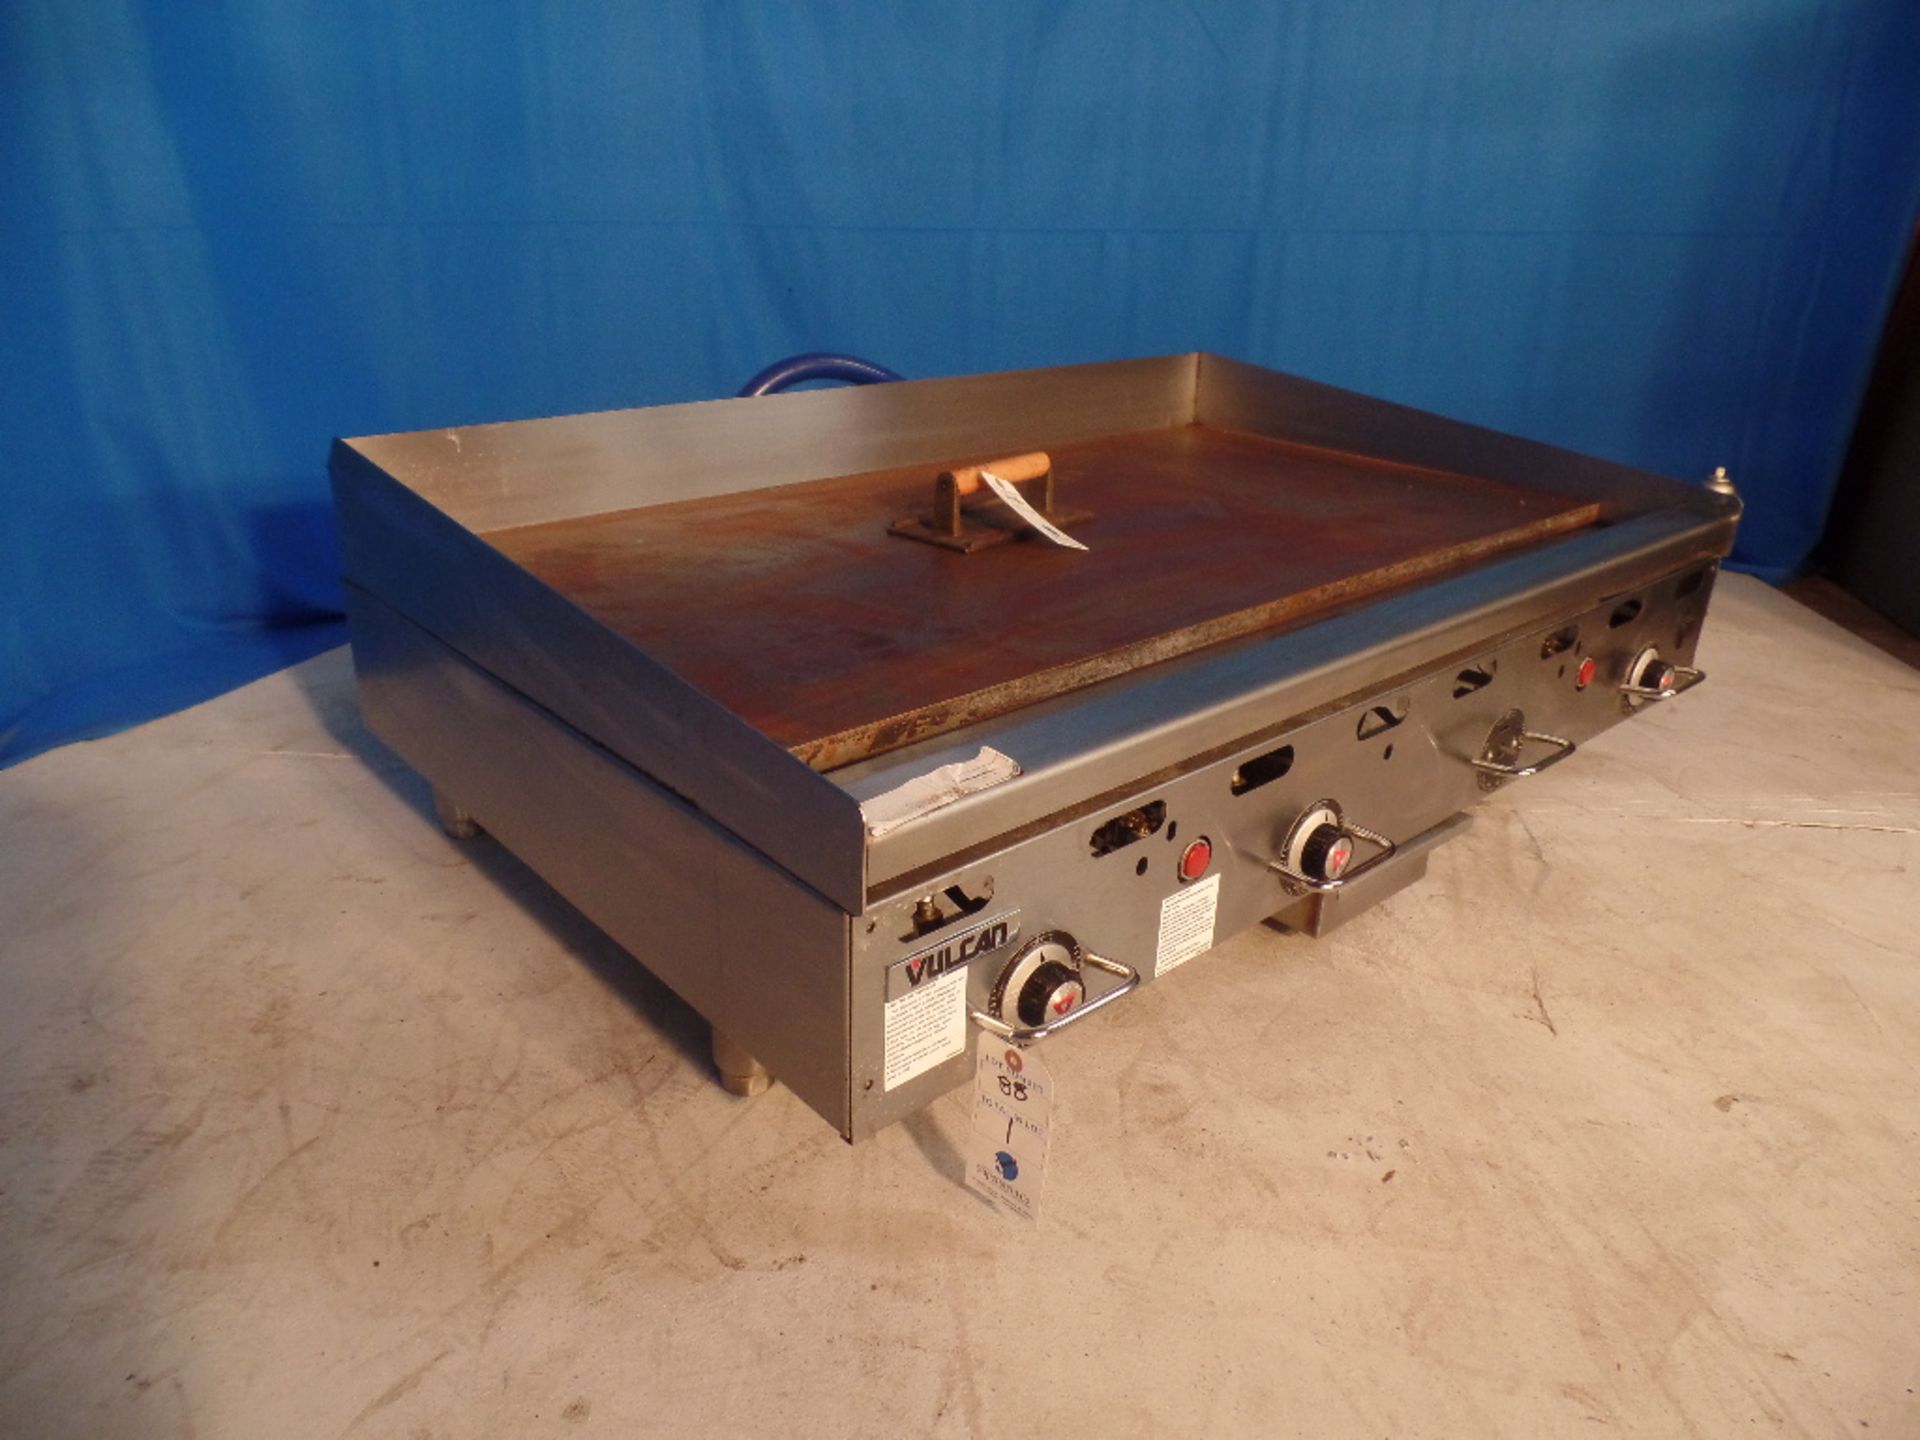 LATE MODEL RESTAURANT EQUIPMENT AUCTION PREVIEW LOT - DO NOT BID ON LOT. - Image 11 of 14